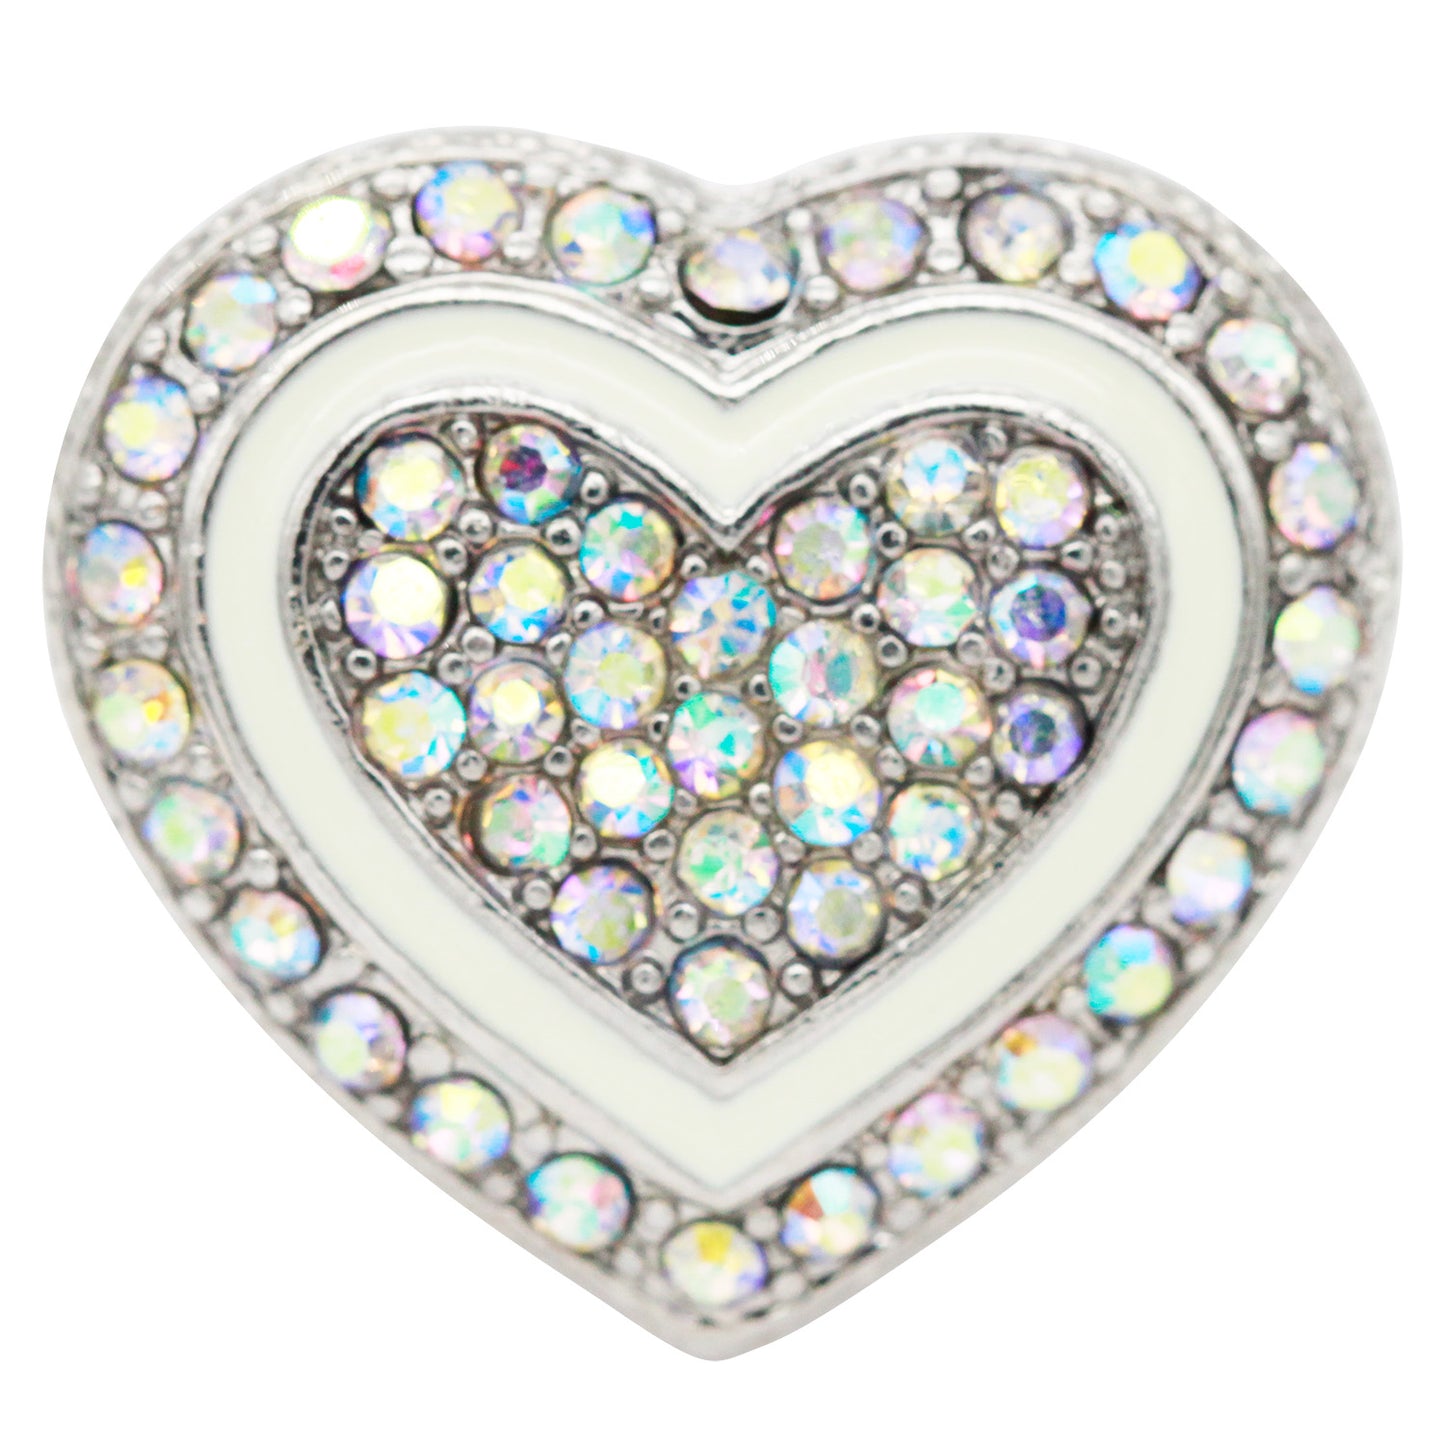 Lavencious Heart Shaped Rhinestones Stretch Rings for Women Size for 7-9(Silver AB)